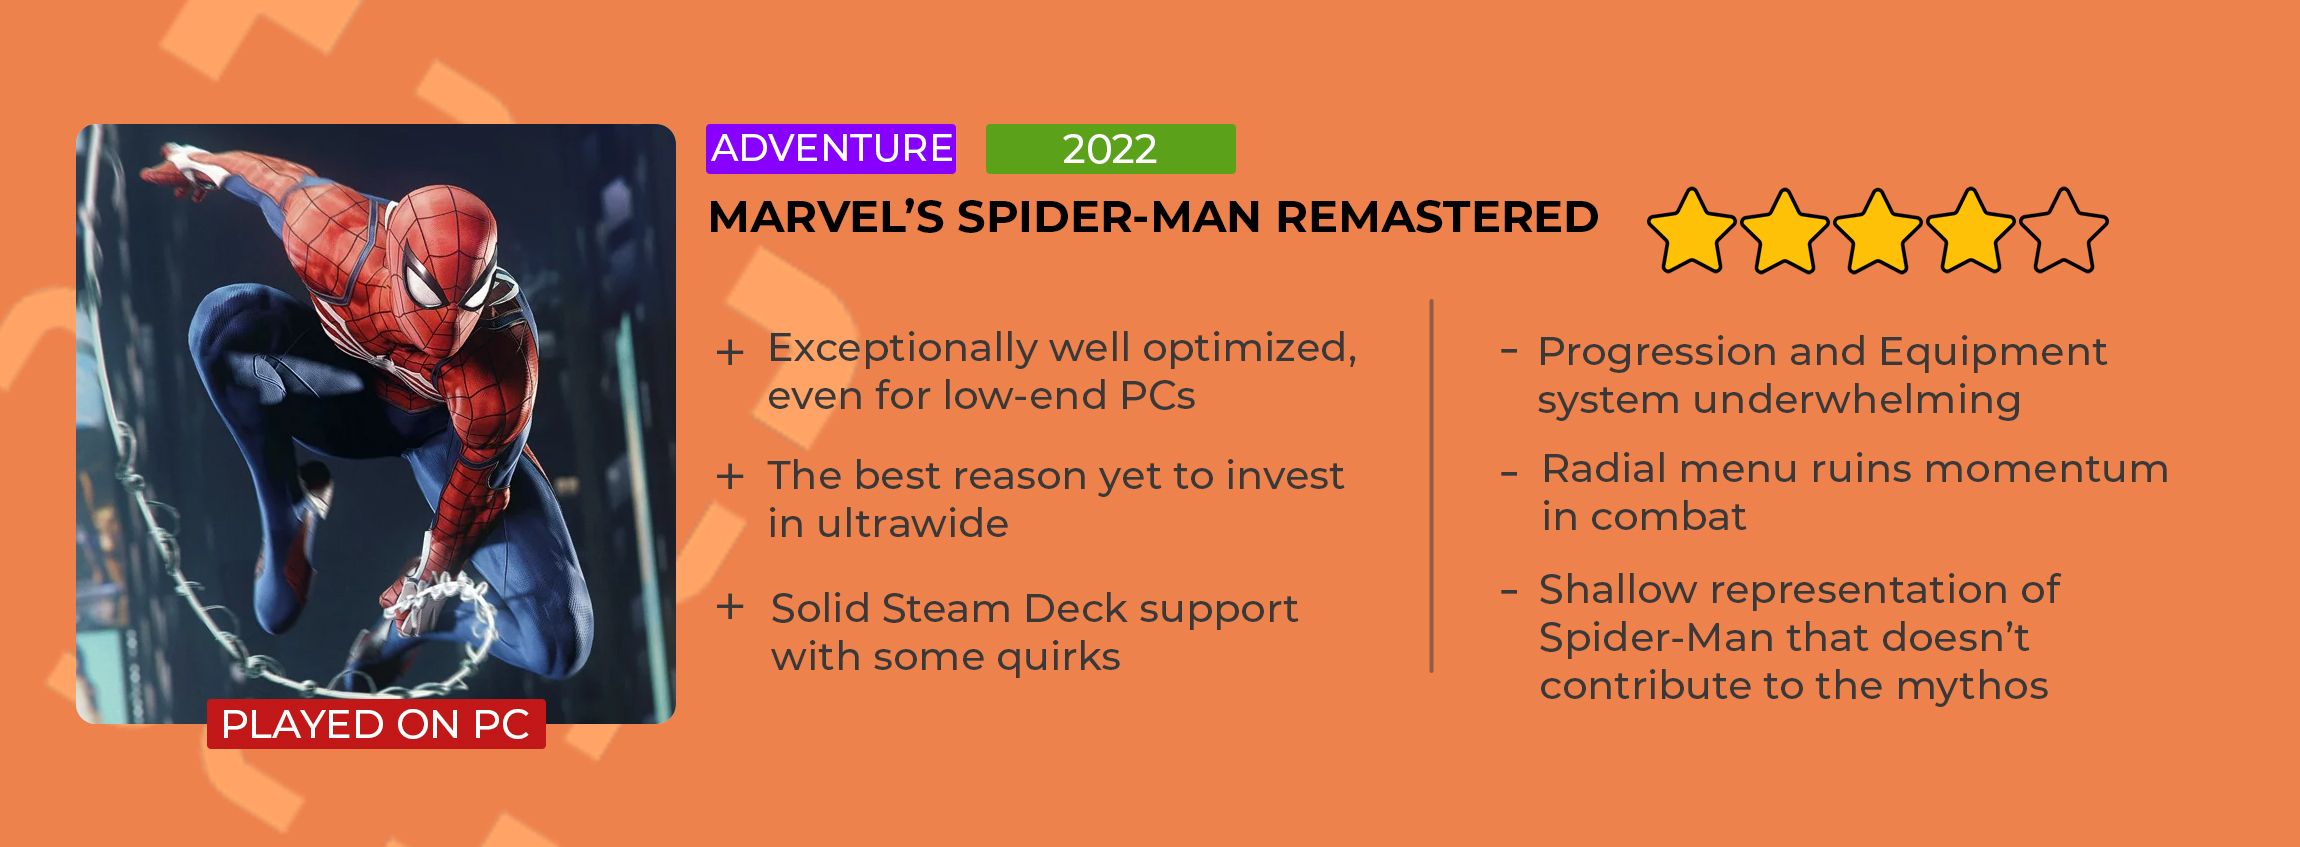 Spider-Man PC Review Card